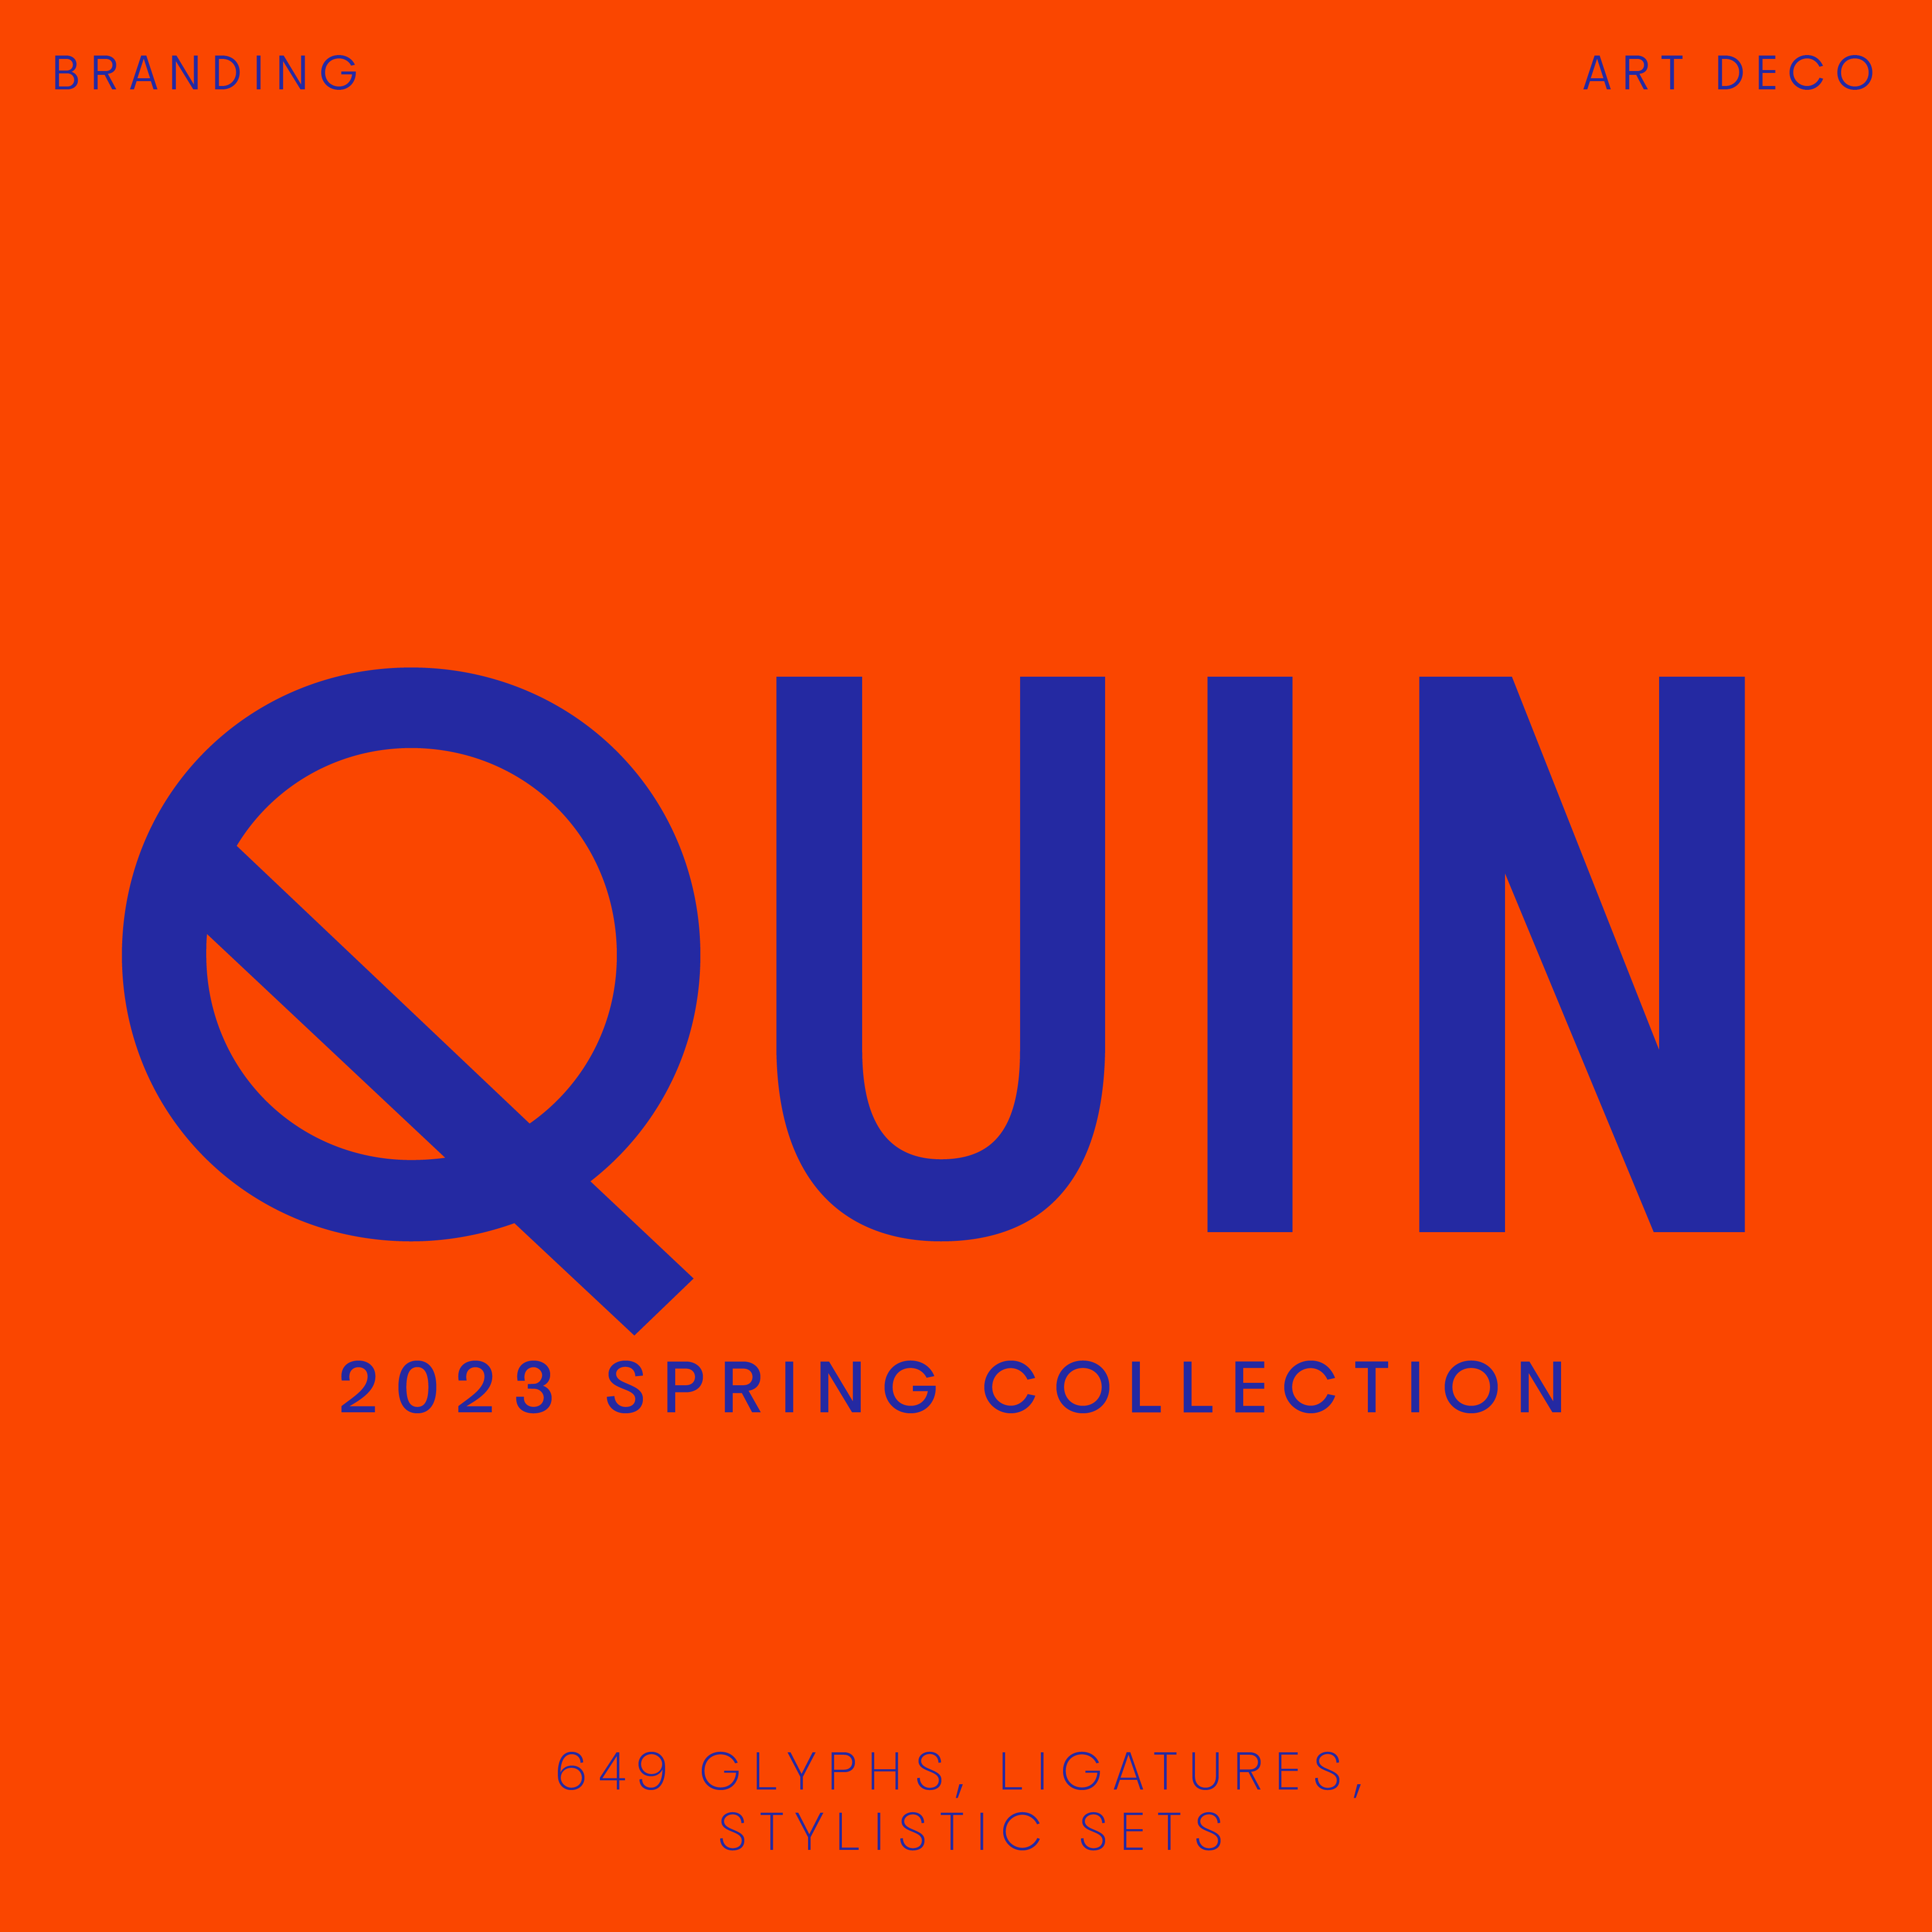 Quin—’20s font in Art Deco style